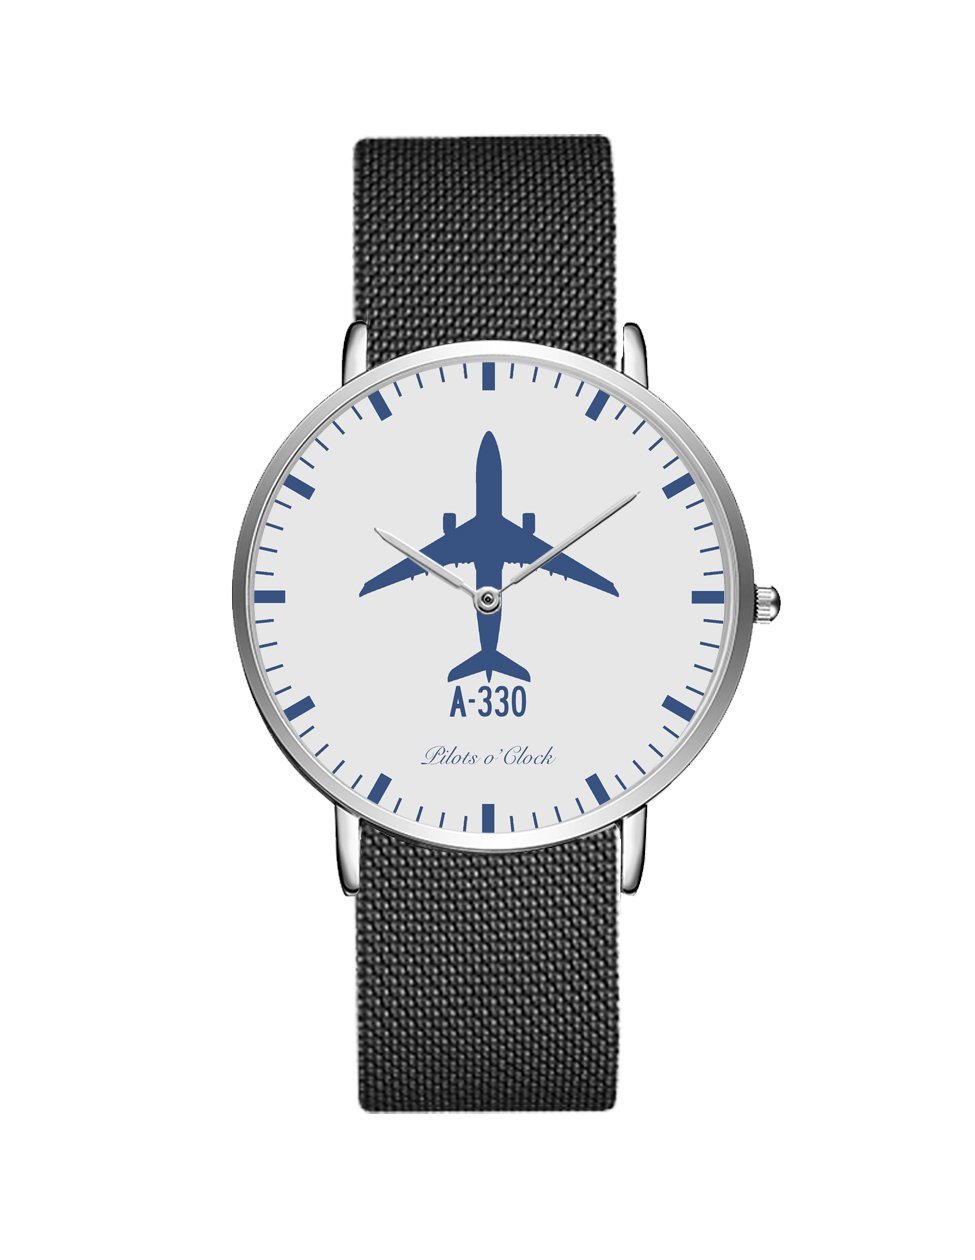 Airbus A330 Stainless Steel Strap Watches Pilot Eyes Store Silver & Black Stainless Steel Strap 